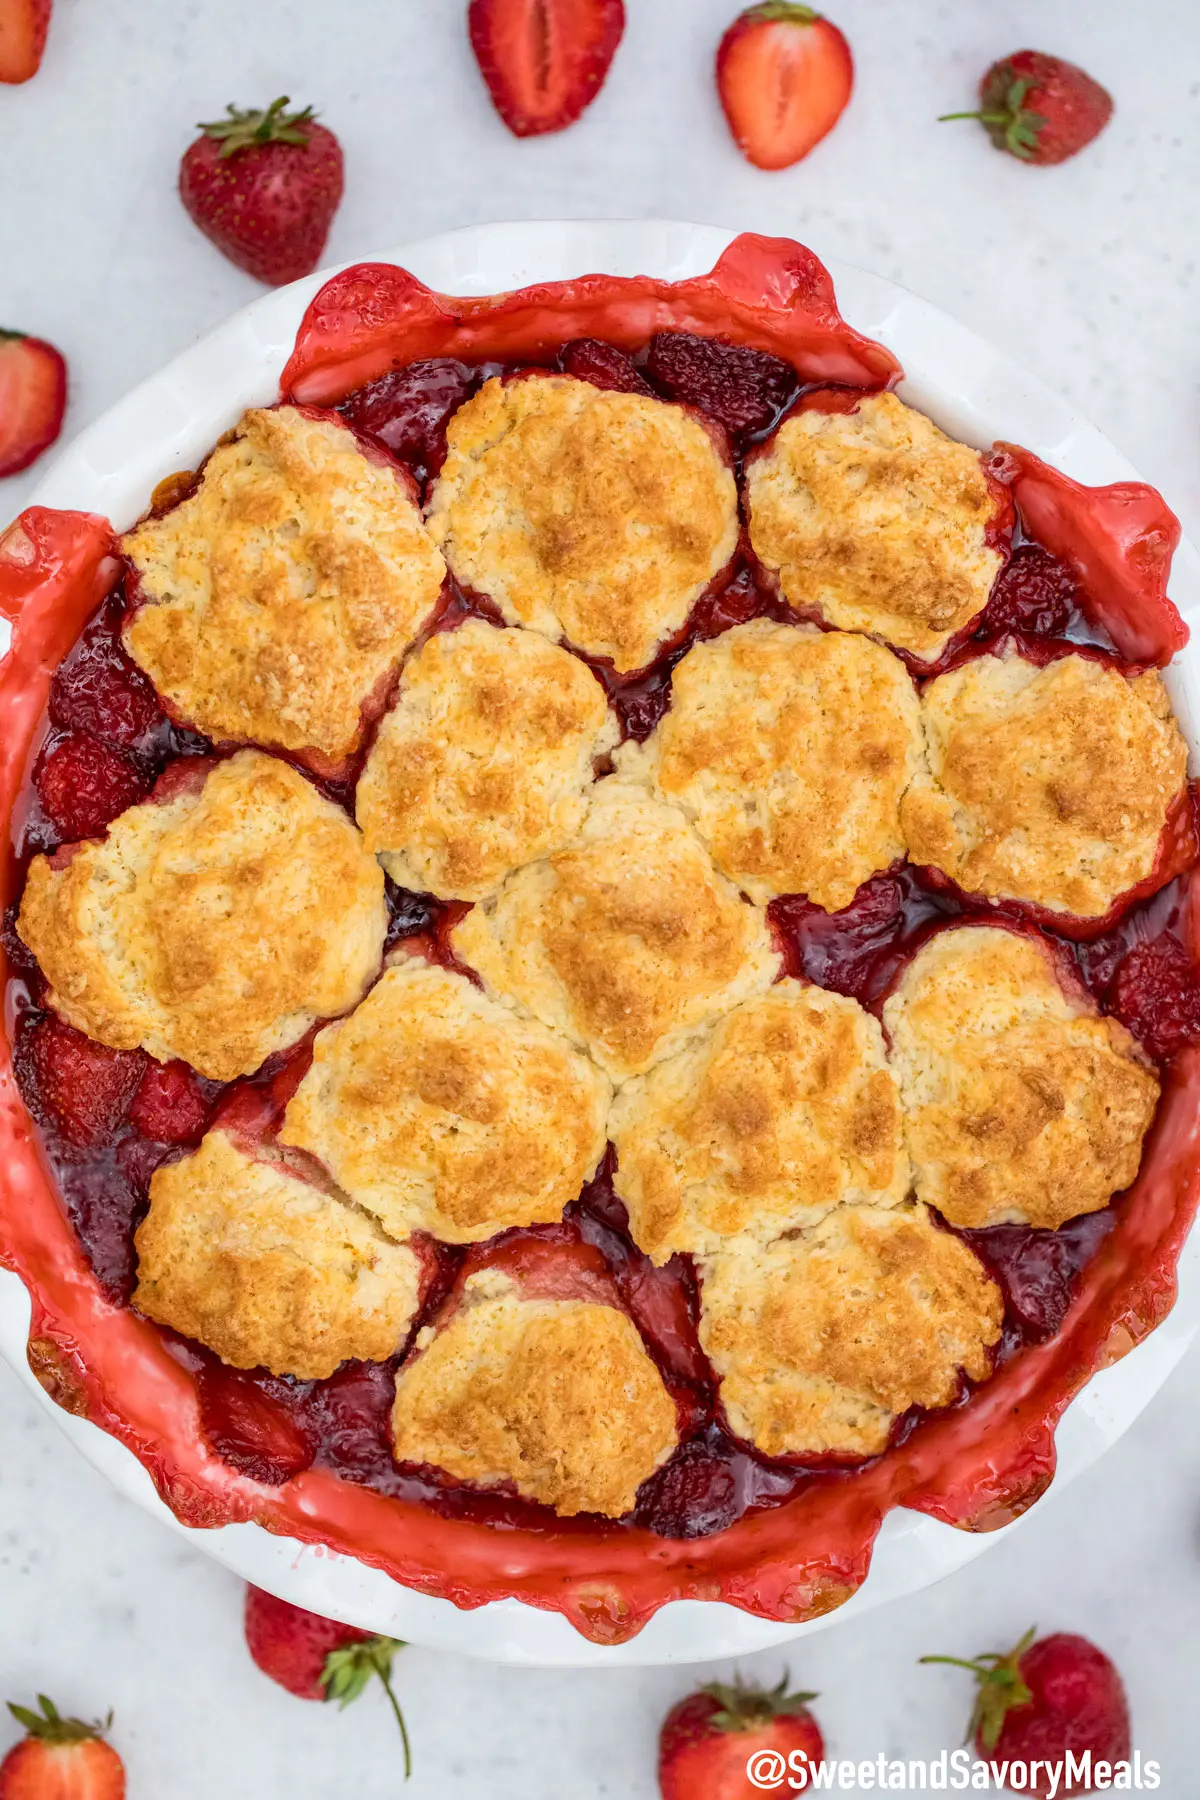 Best Strawberry Cobbler Recipe [Video] - Sweet and Savory Meals